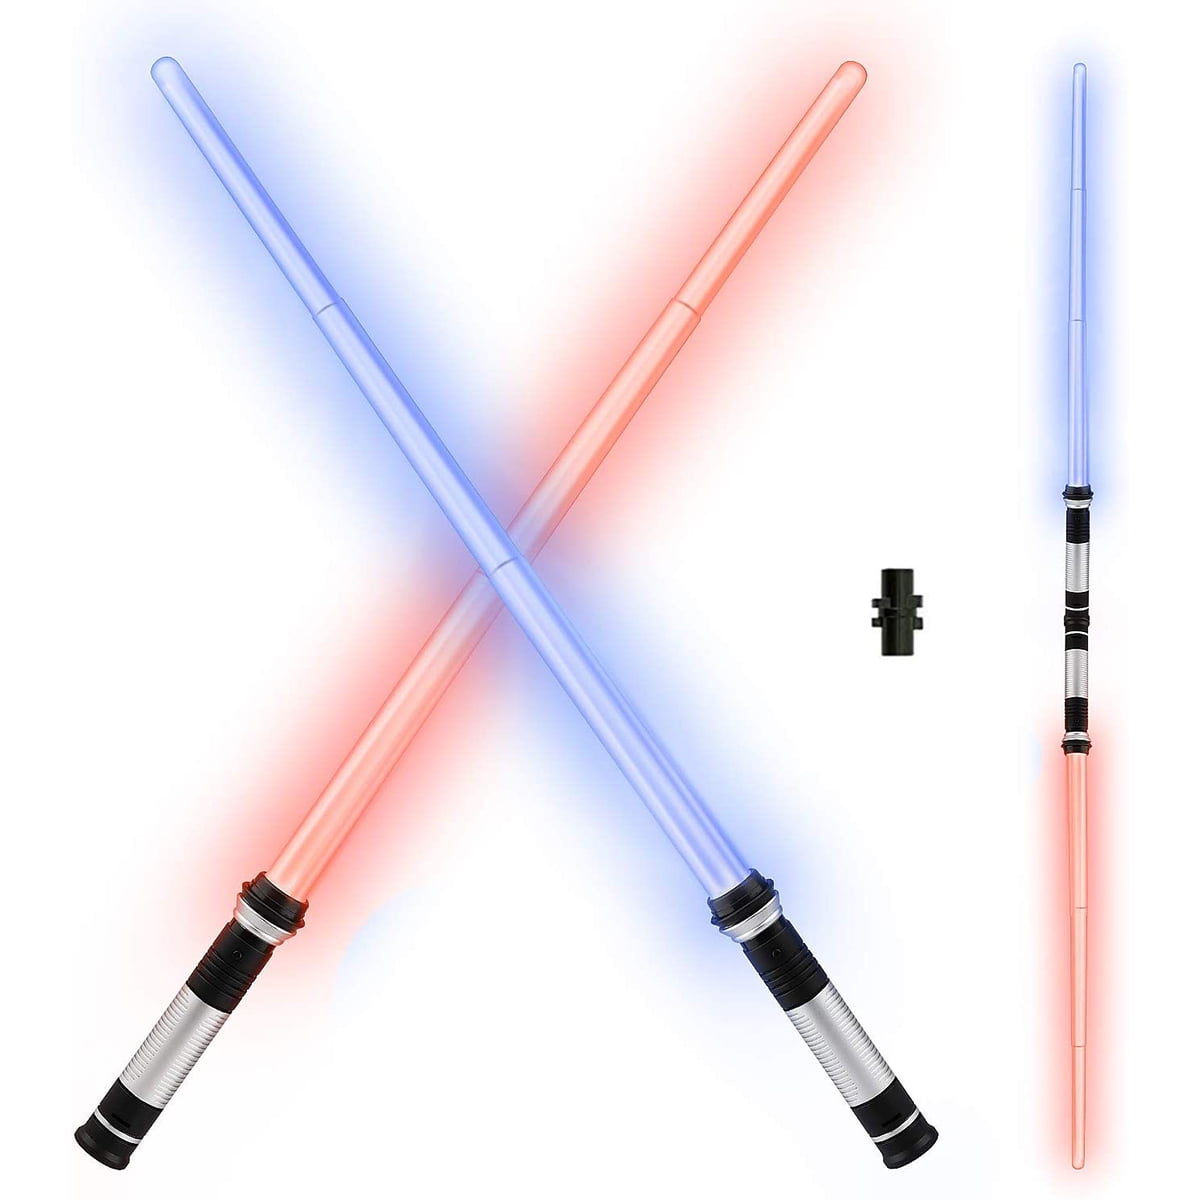 2 DOUBLE SIDED MULTICOLOR LIGHT UP SWORD toys swords wand outer space sabers toy 